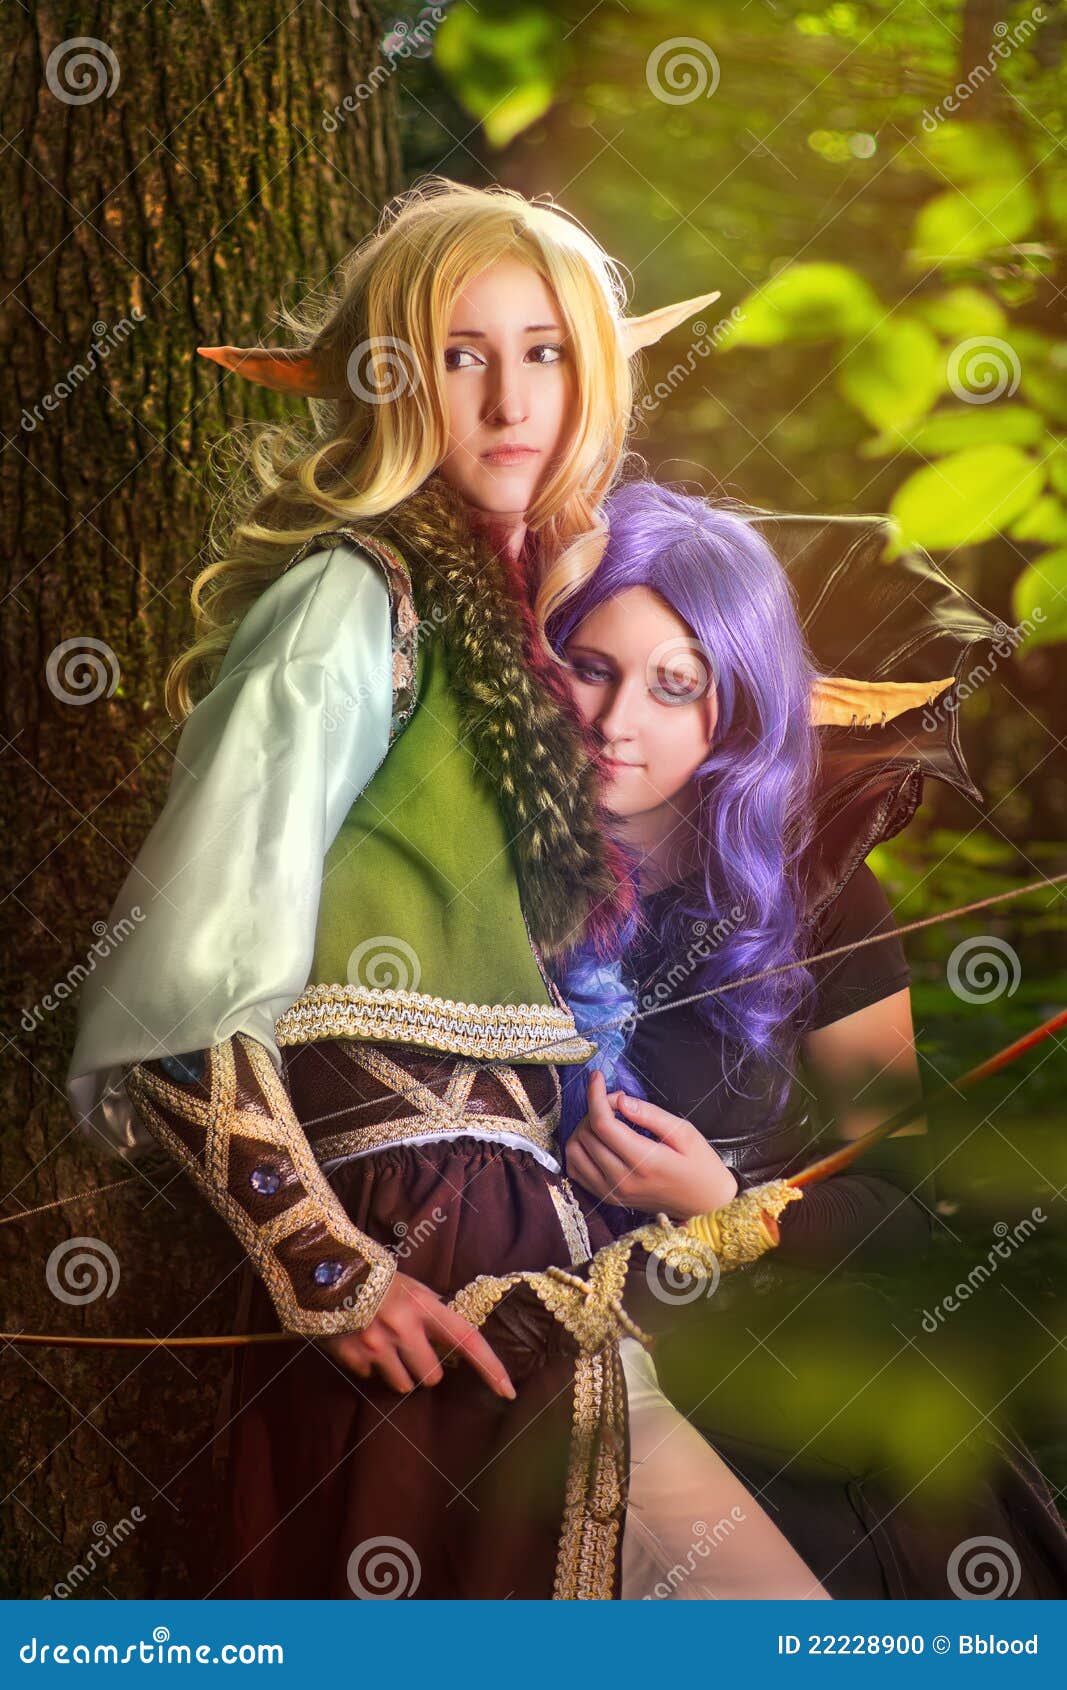 elves from the woods